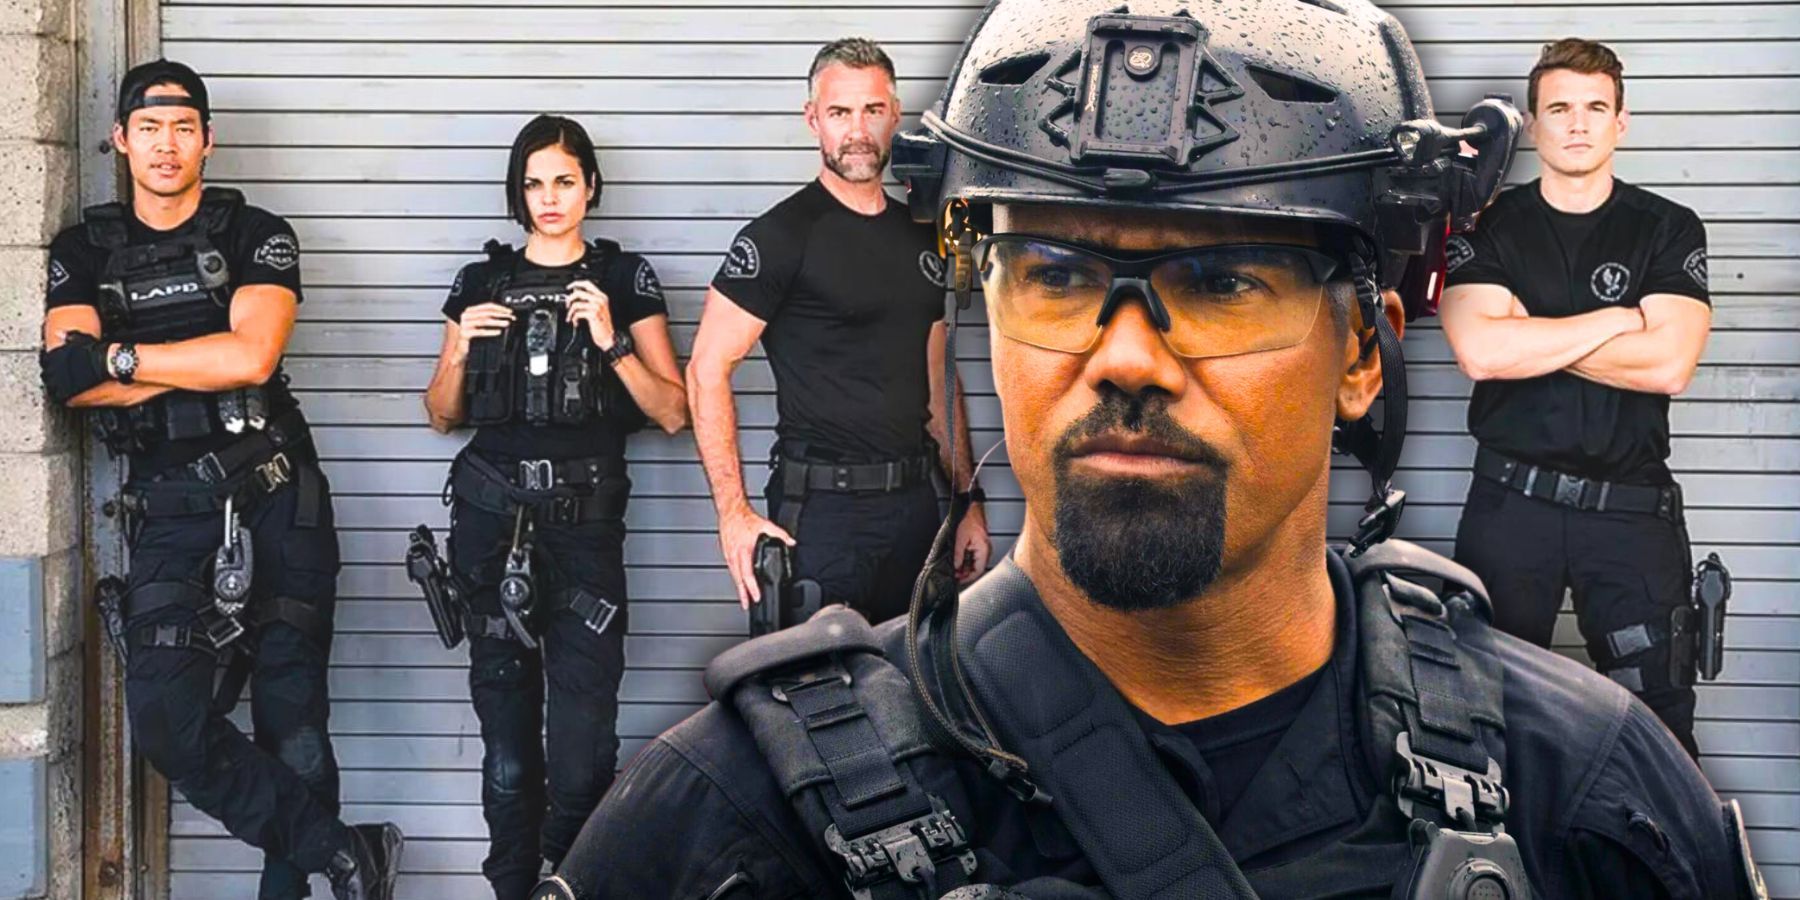 S.W.A.T. Season 7: Renewal, Release Date Prediction, Cast & Everything We Know